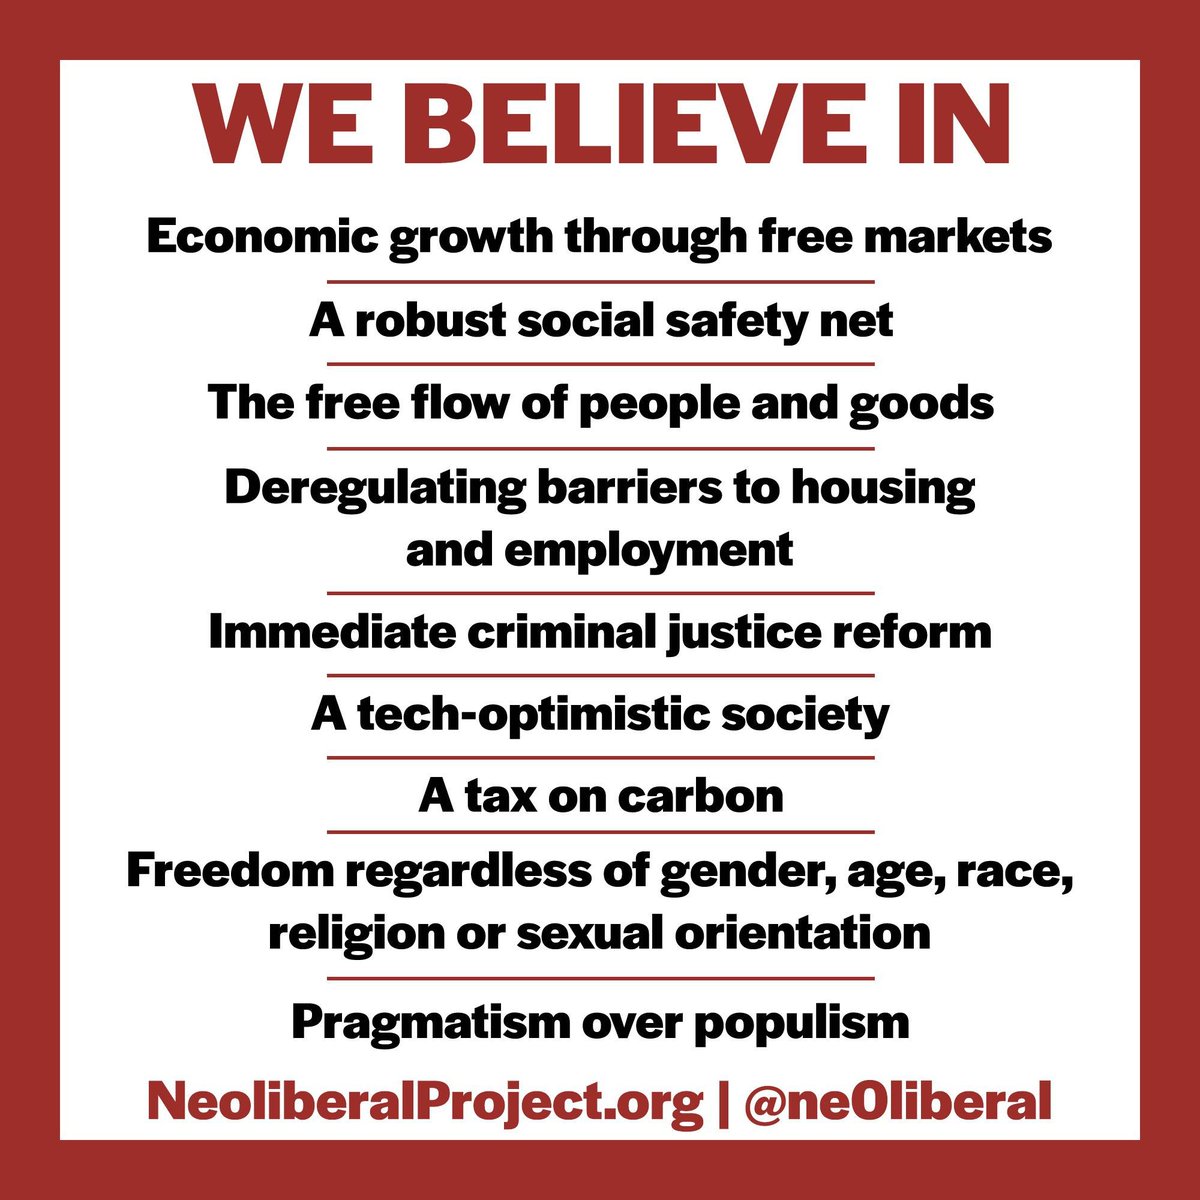 The belief that we need to fix these problems in order to turbo-charge innovation is a core part of the Neoliberal Project. It's what we mean when we call for a 'tech-optimistic society' in our core values.